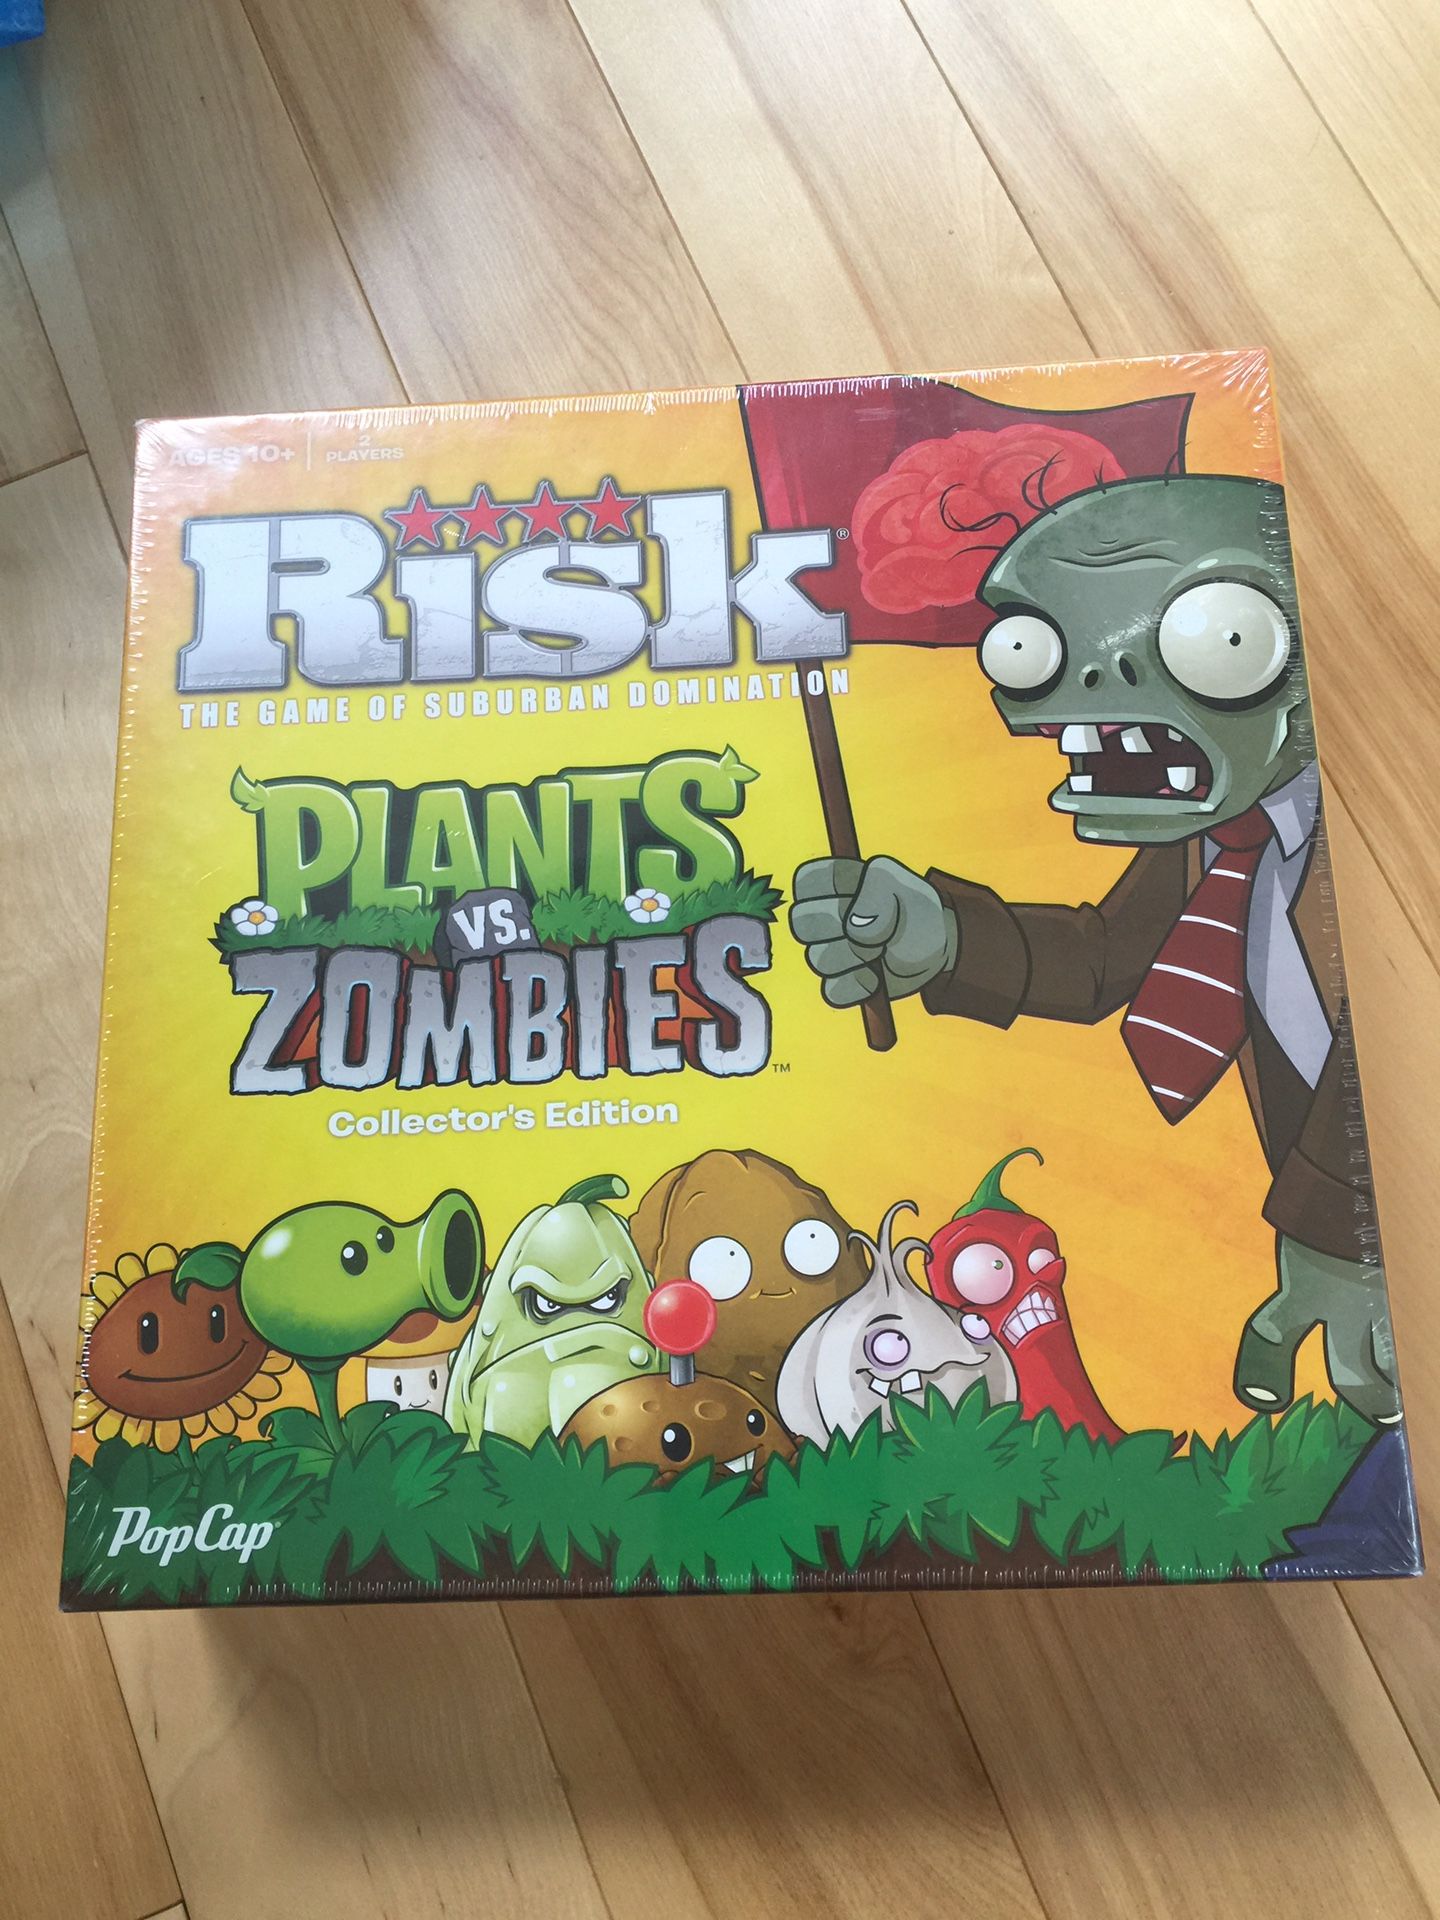 Plants vs Zombies board game